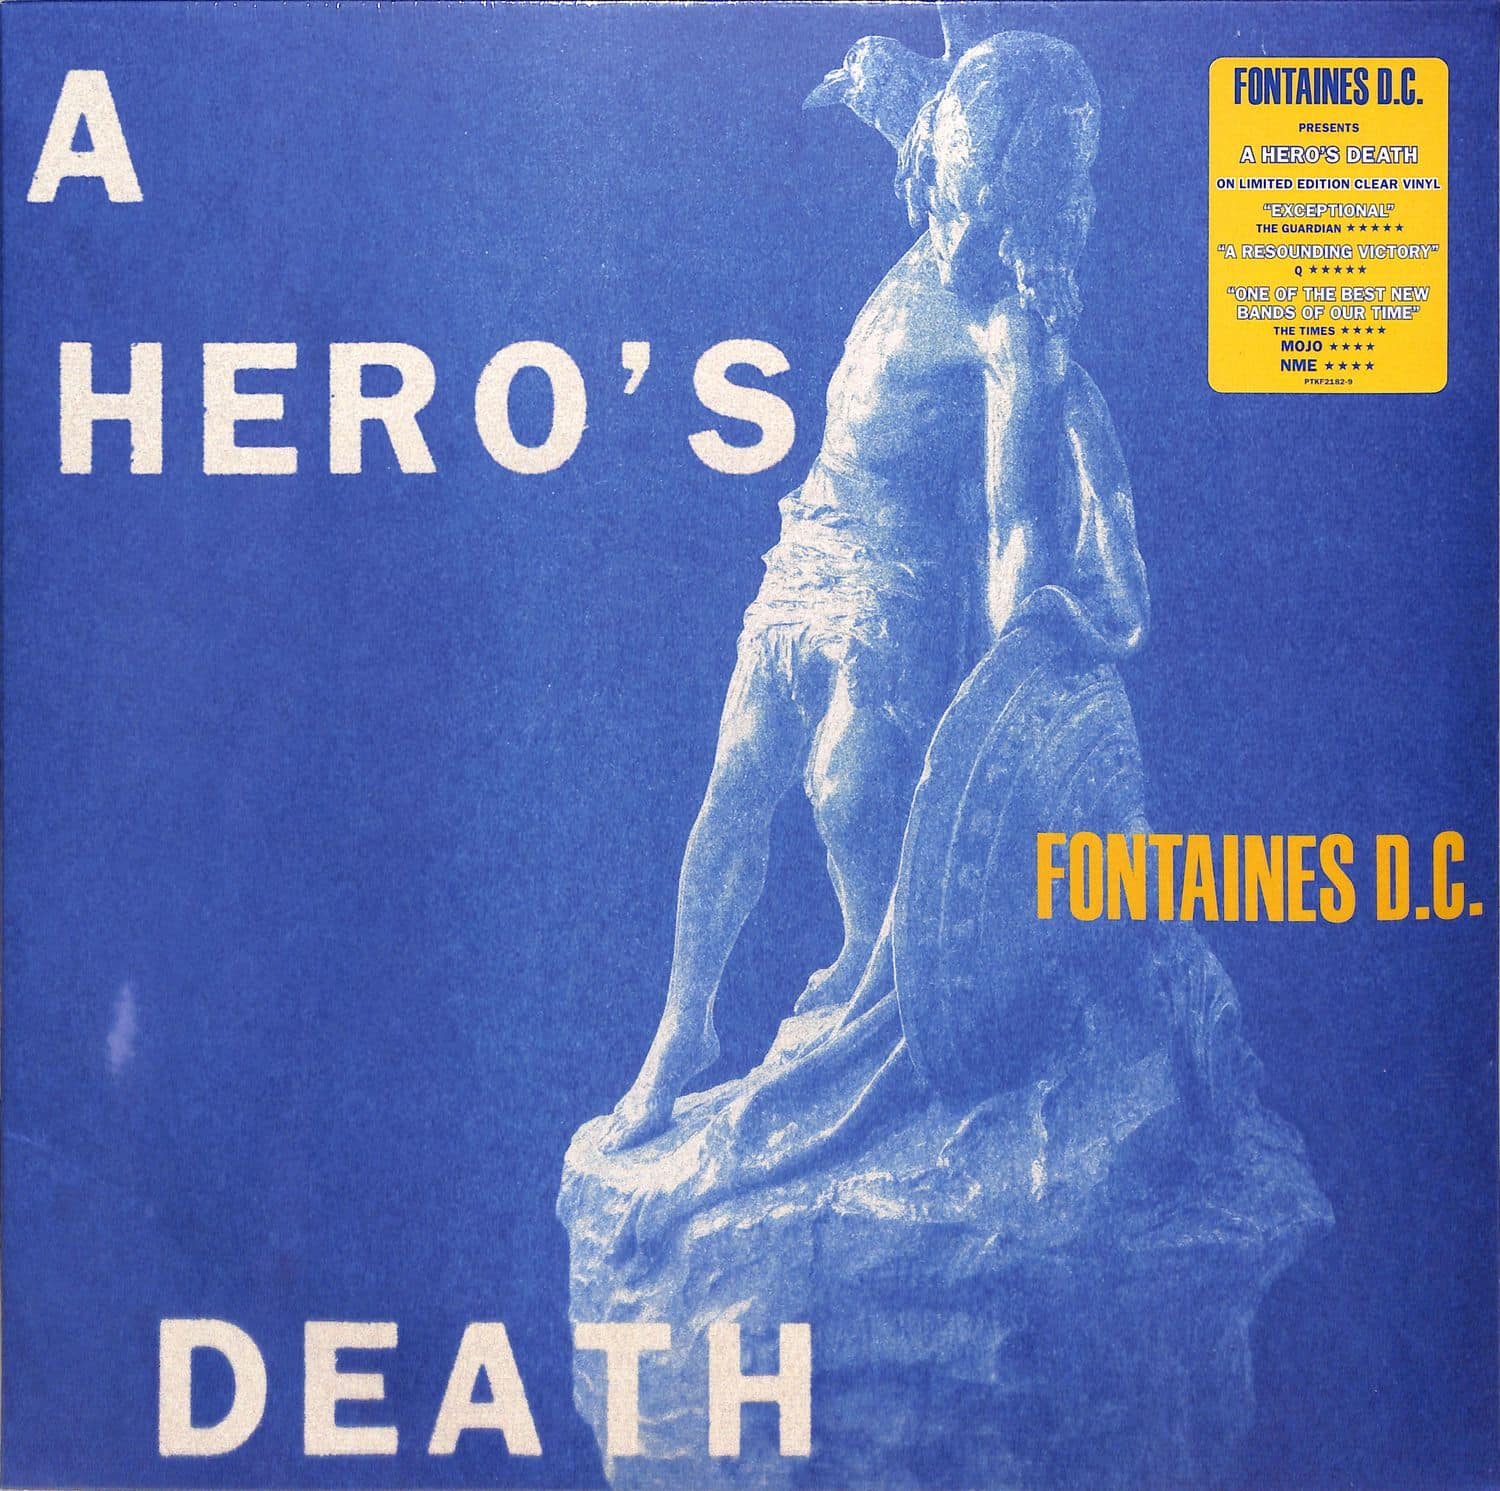 Fontaines D.C. - A HERO S DEATH 